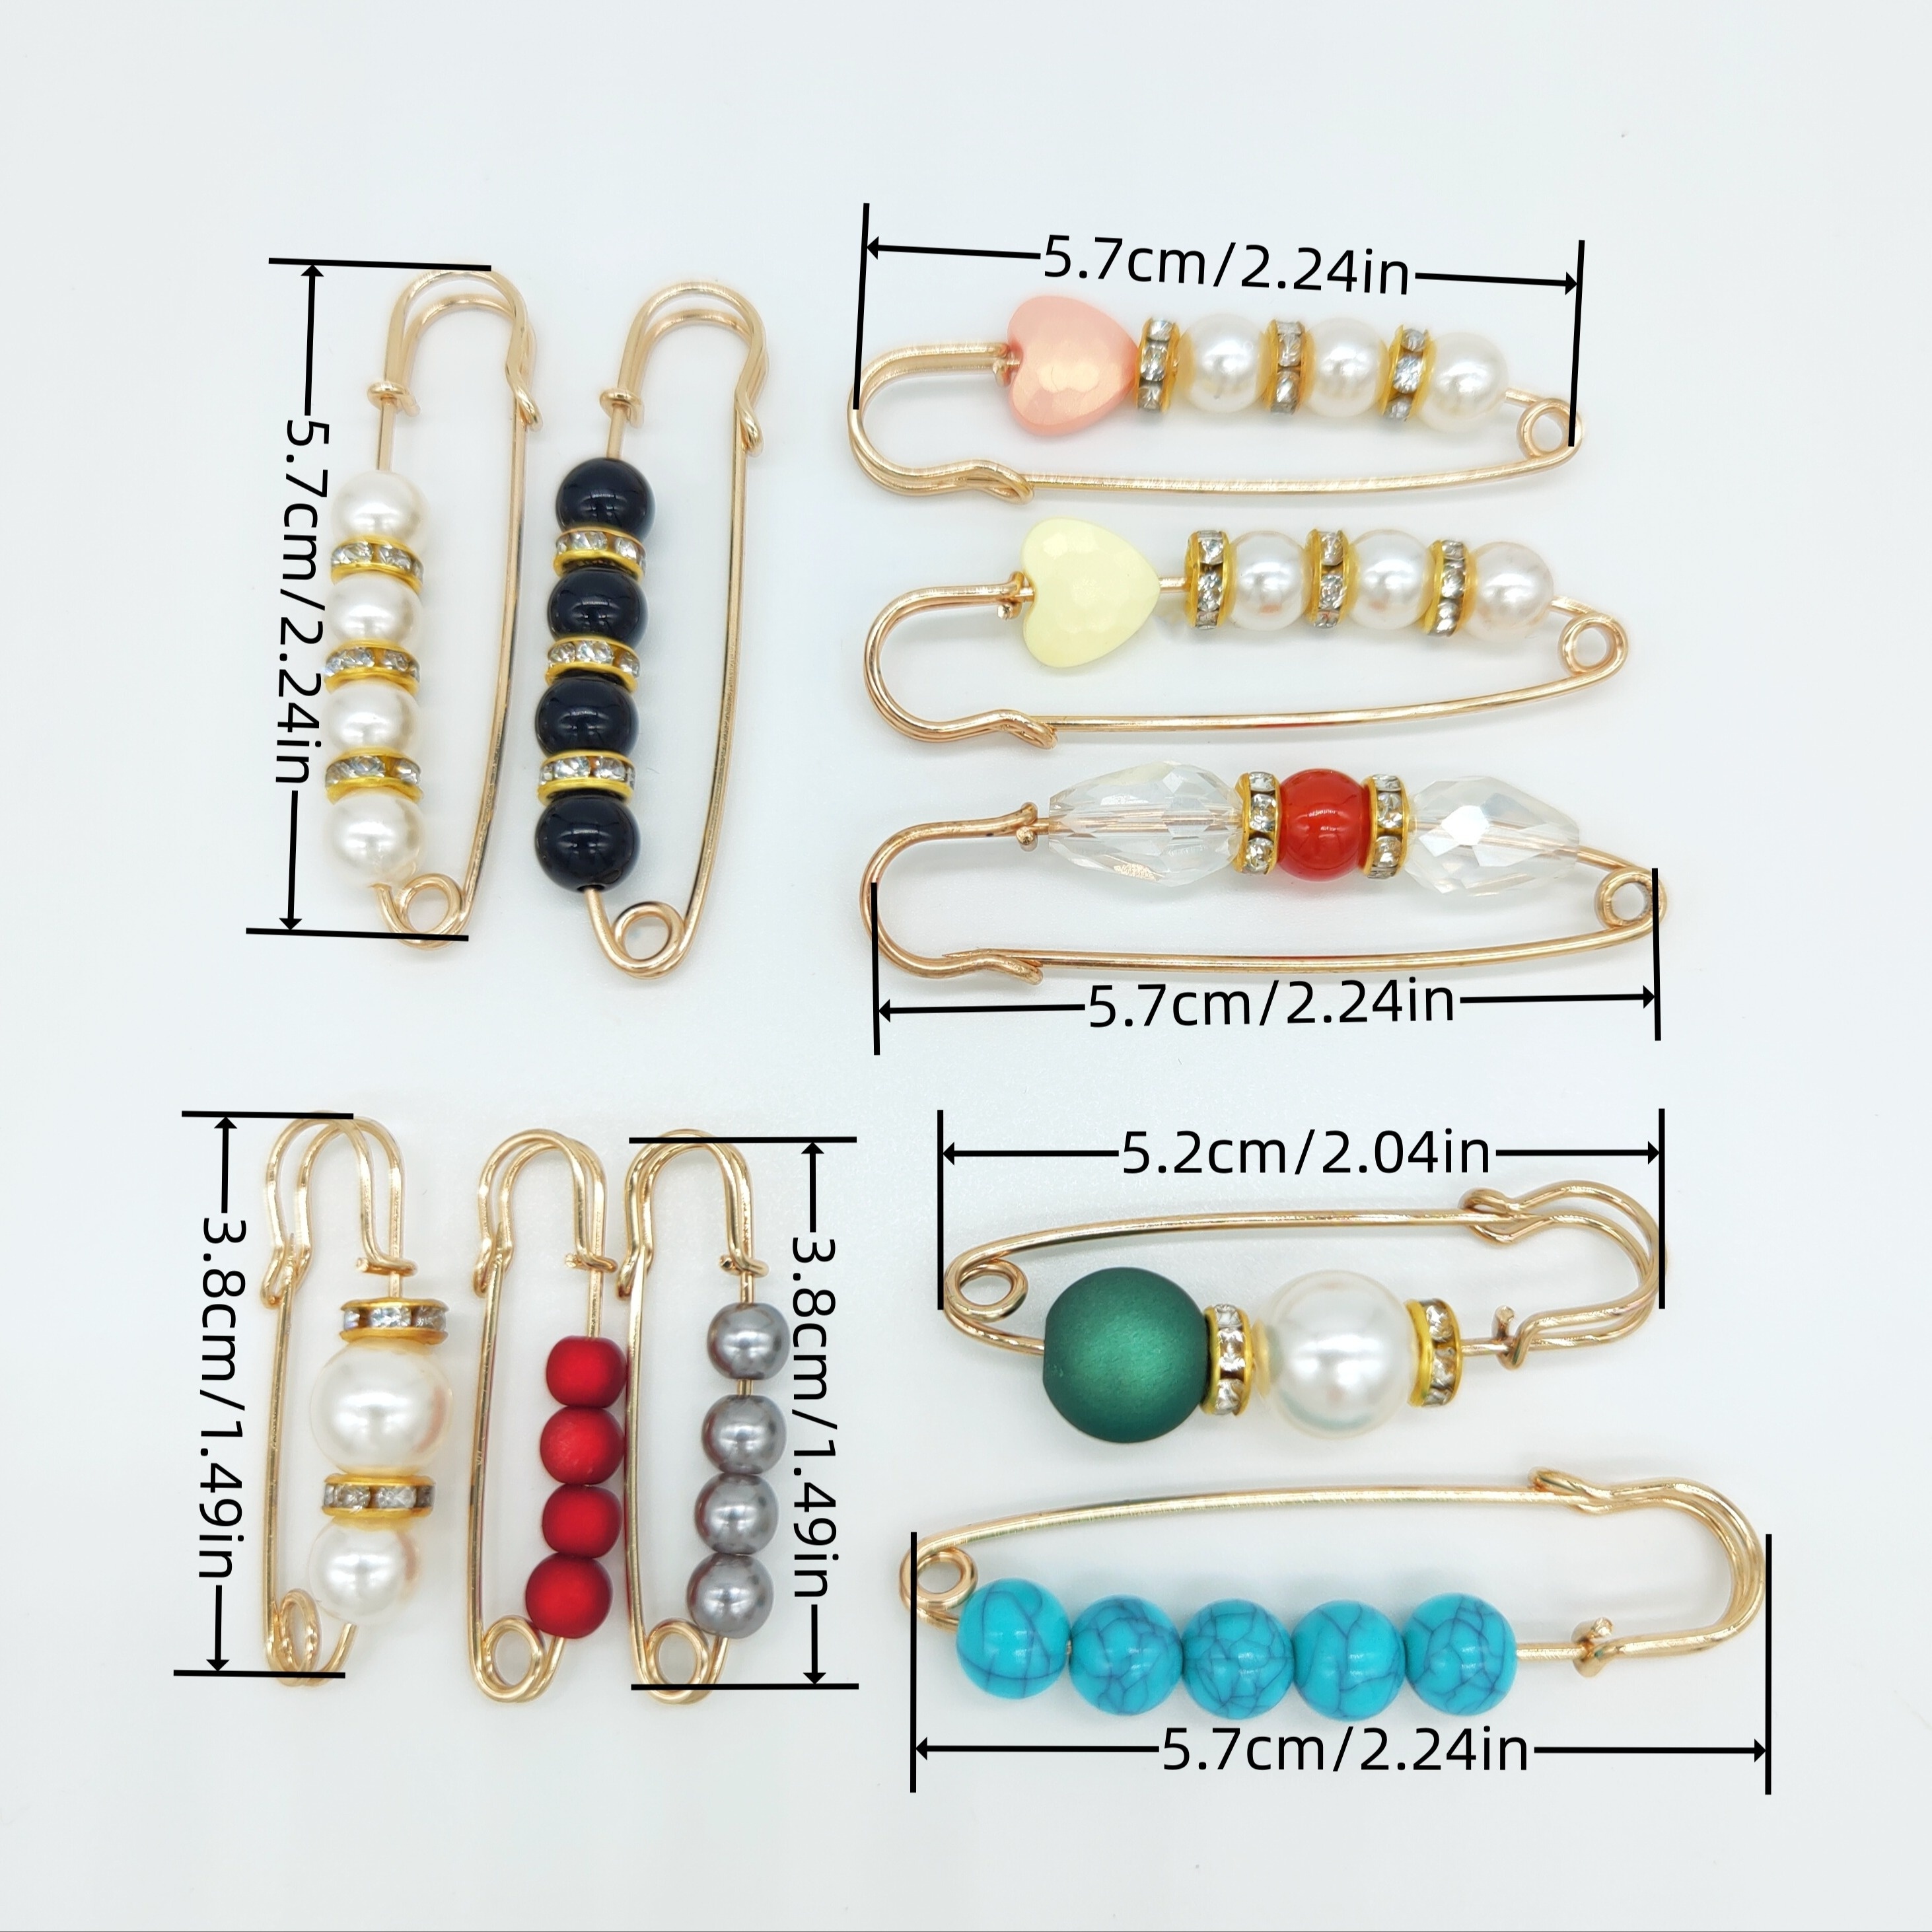 4pcs/set Women's Pearl Brooches For Cardigans, Clothing Collars And  Scarves, Anti-slip Decorative Dress Pins